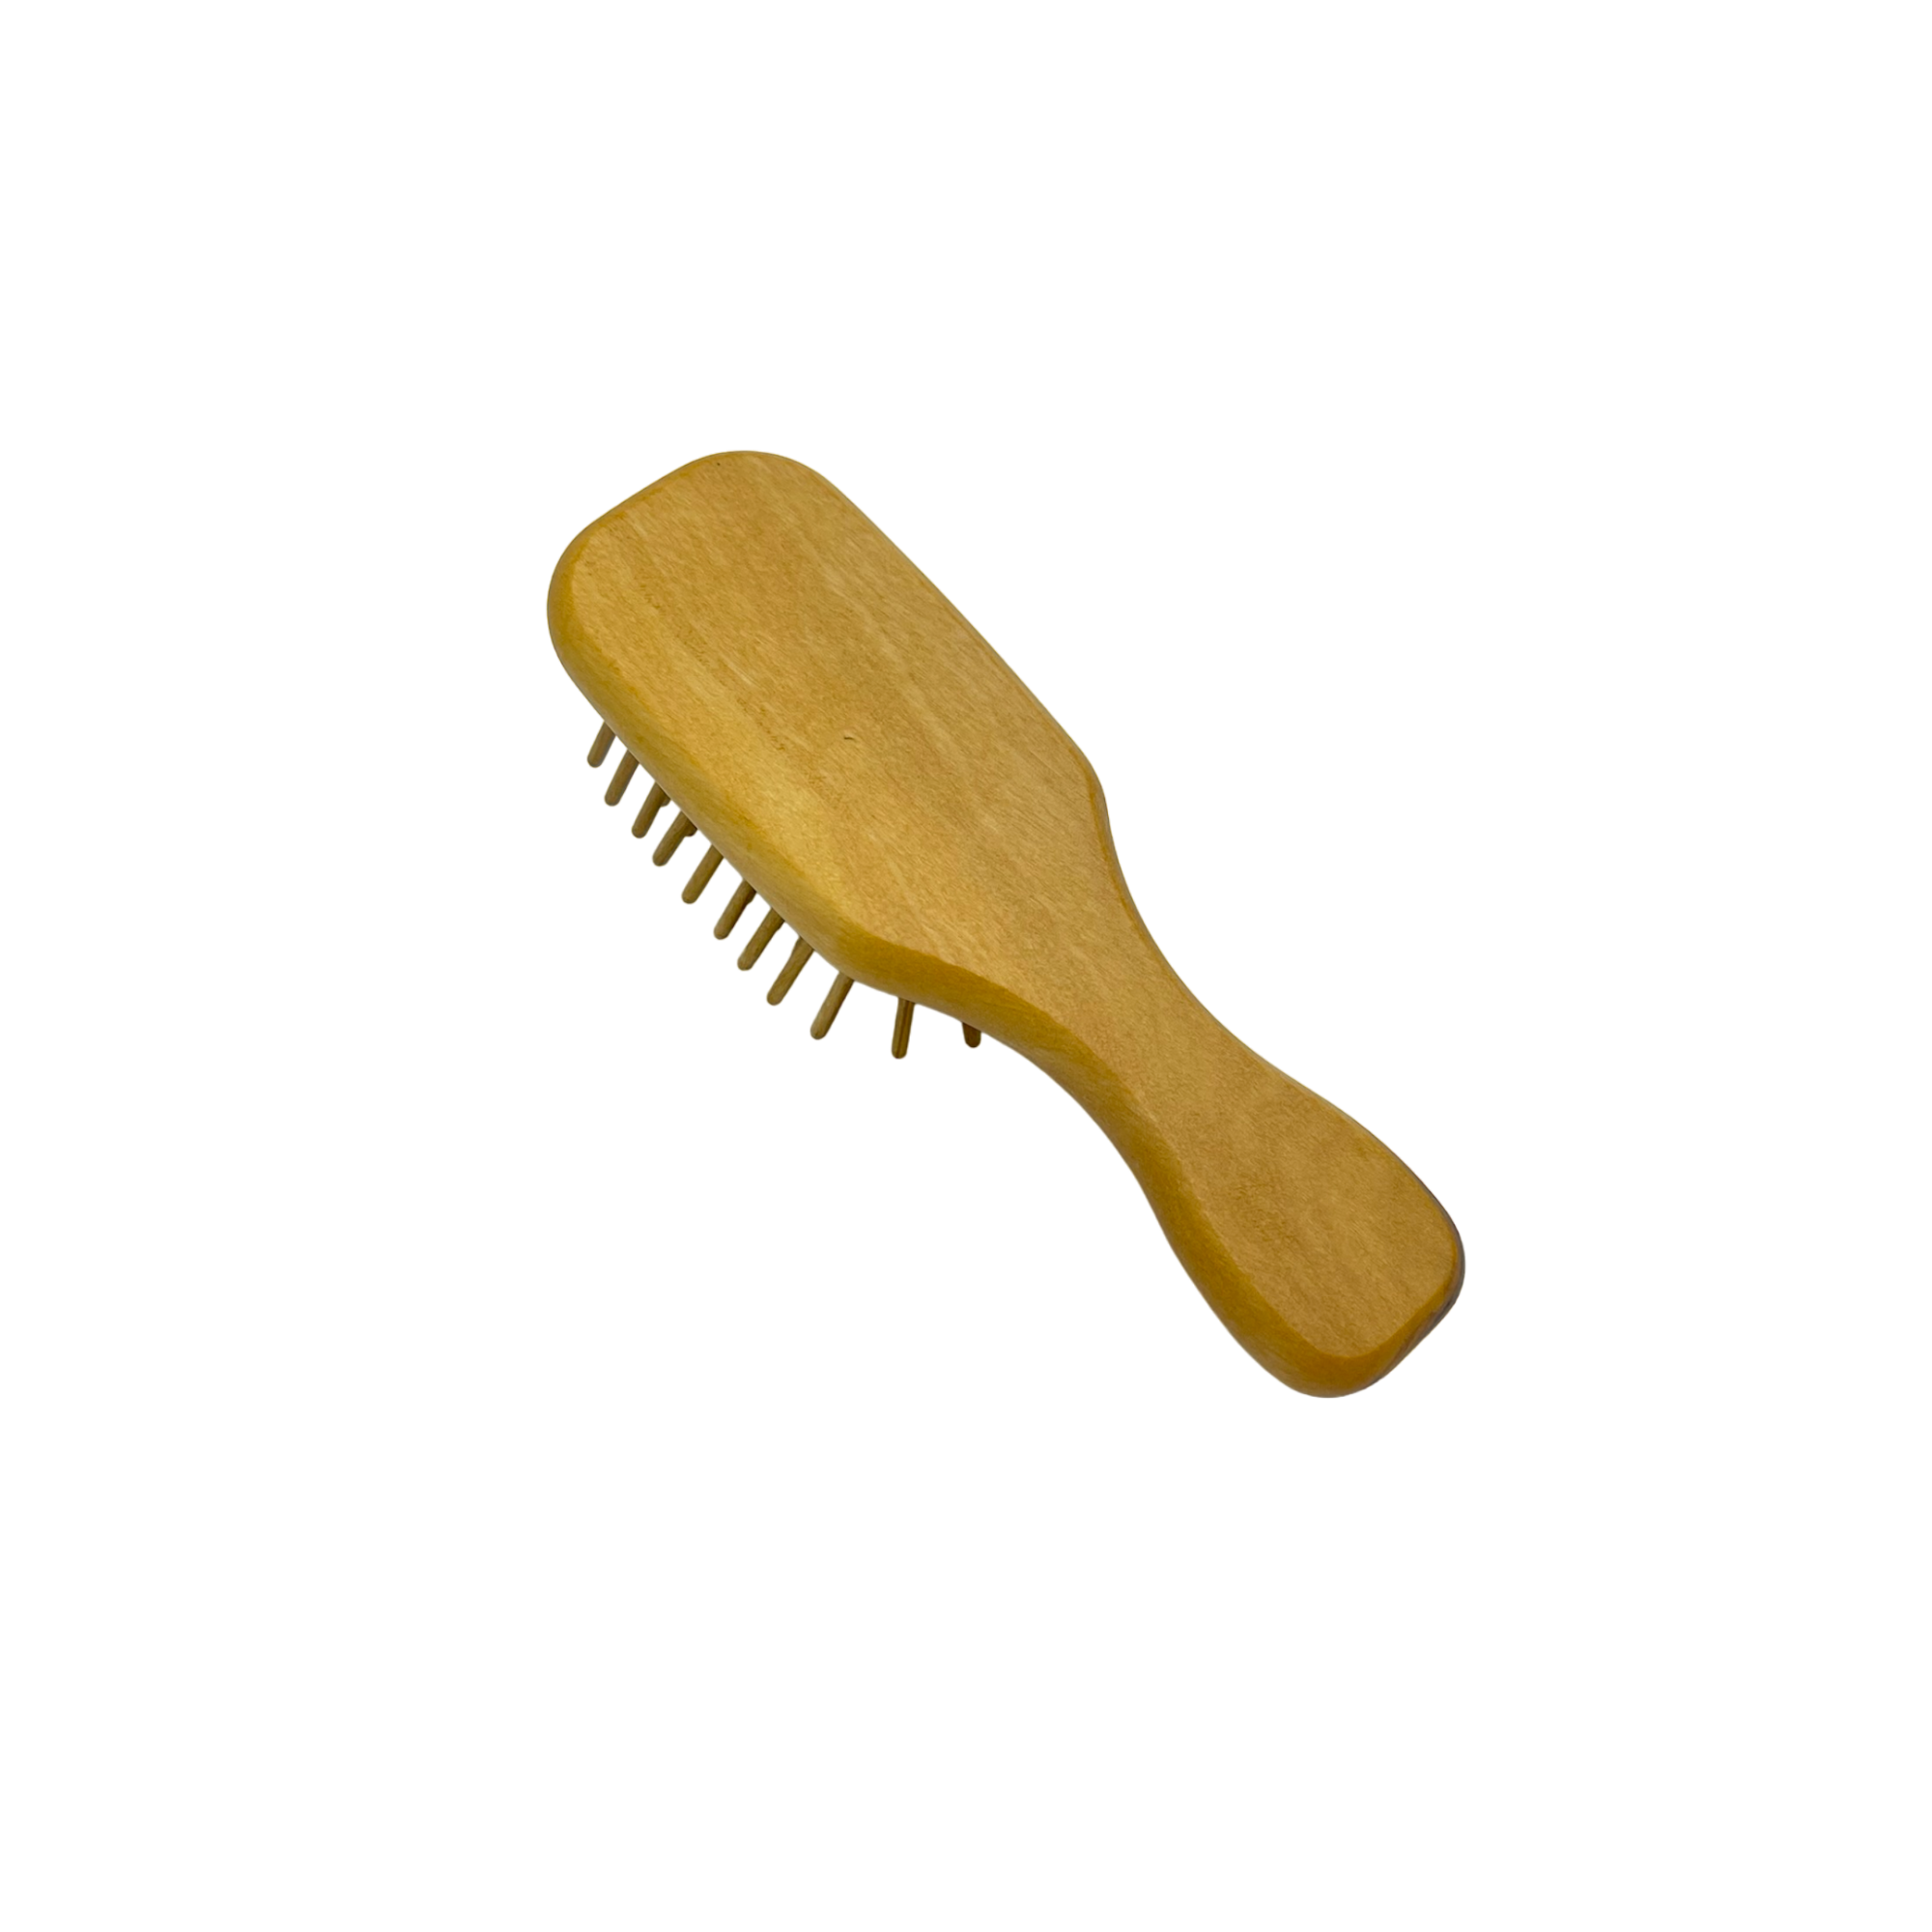 Dural Olive wood mini hair brush with rubber cushion and wooden pins